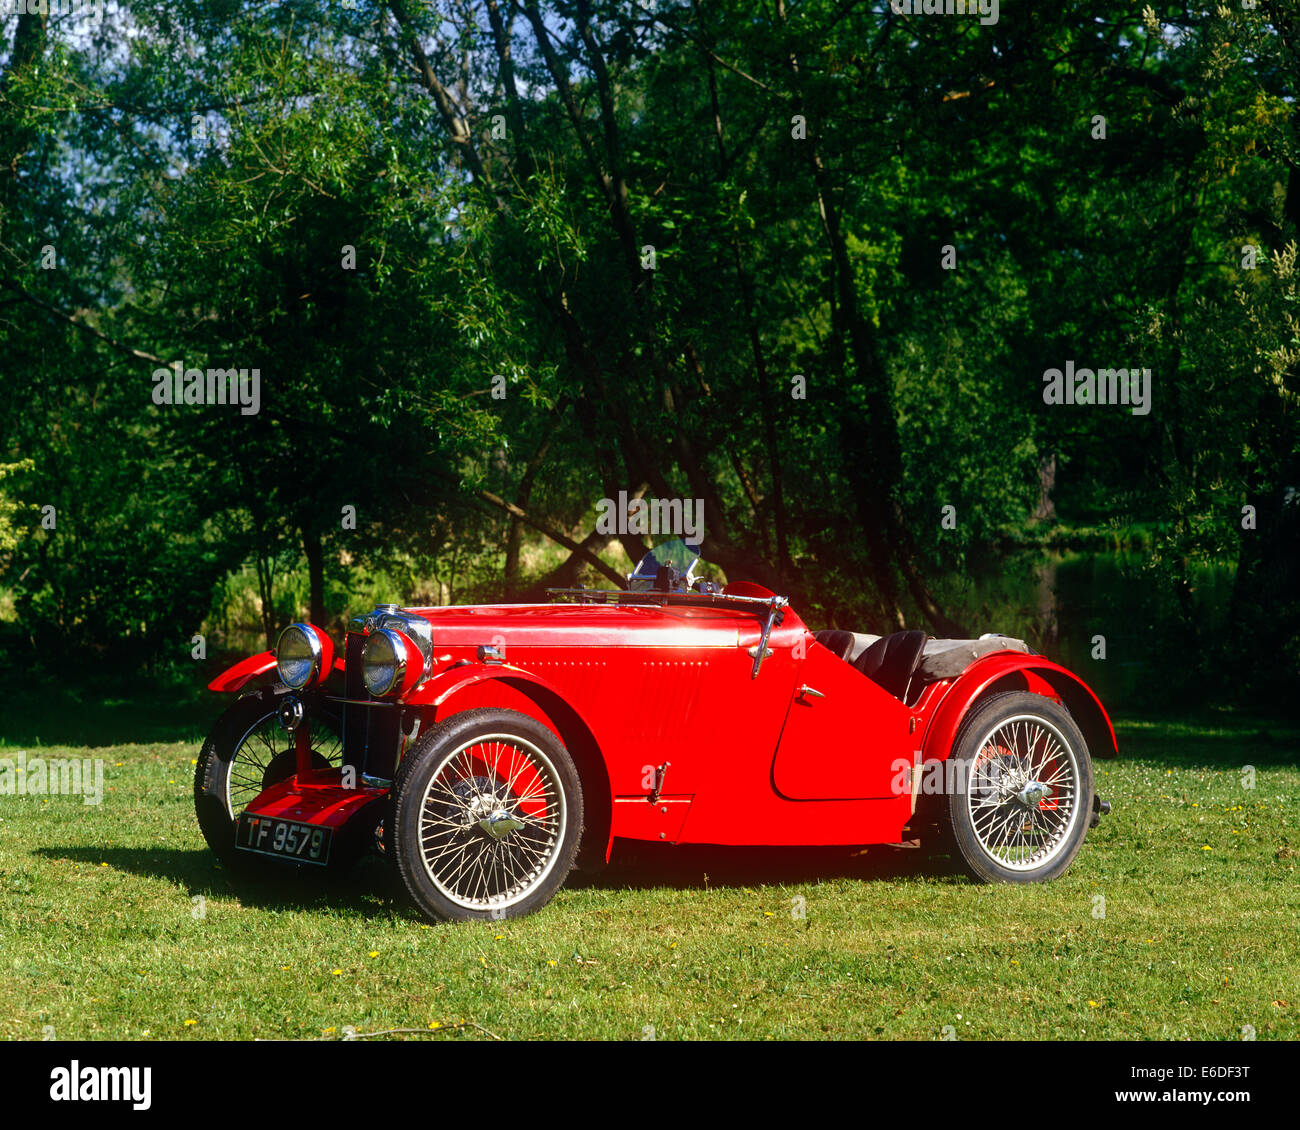 Red M.G. vintage car Stock Photo